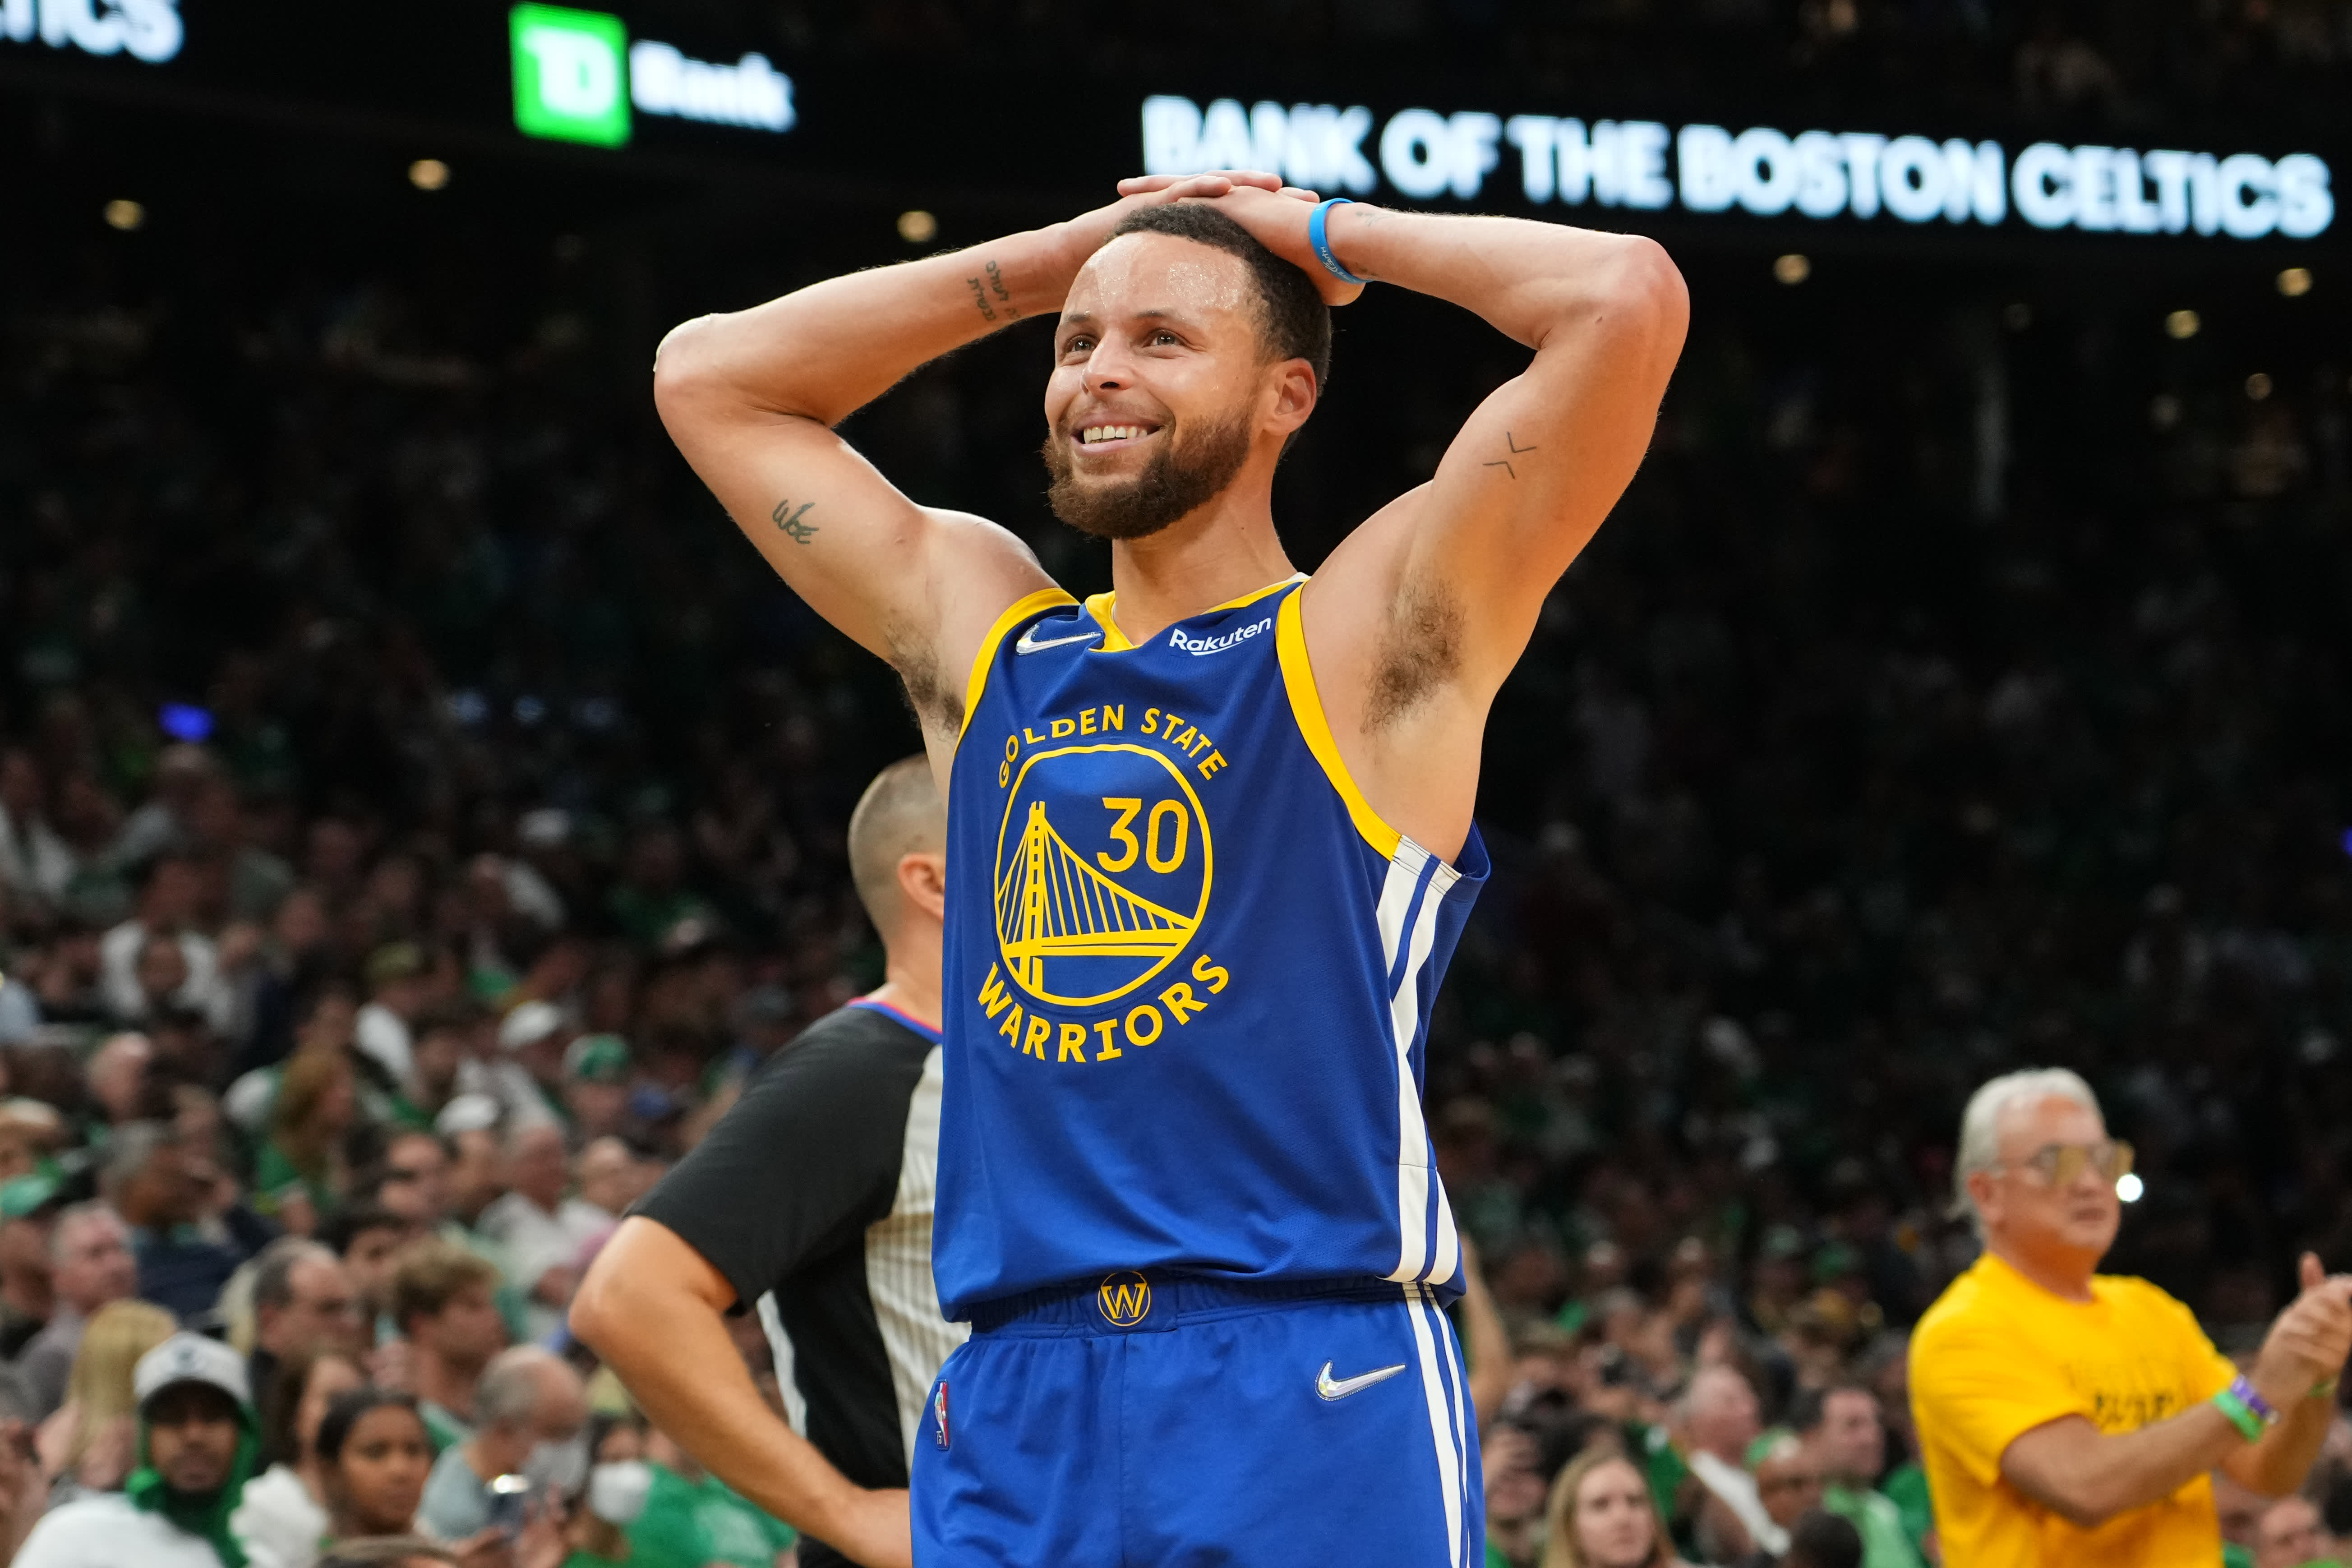 Golden State Warriors close out Boston Celtics to win fourth NBA